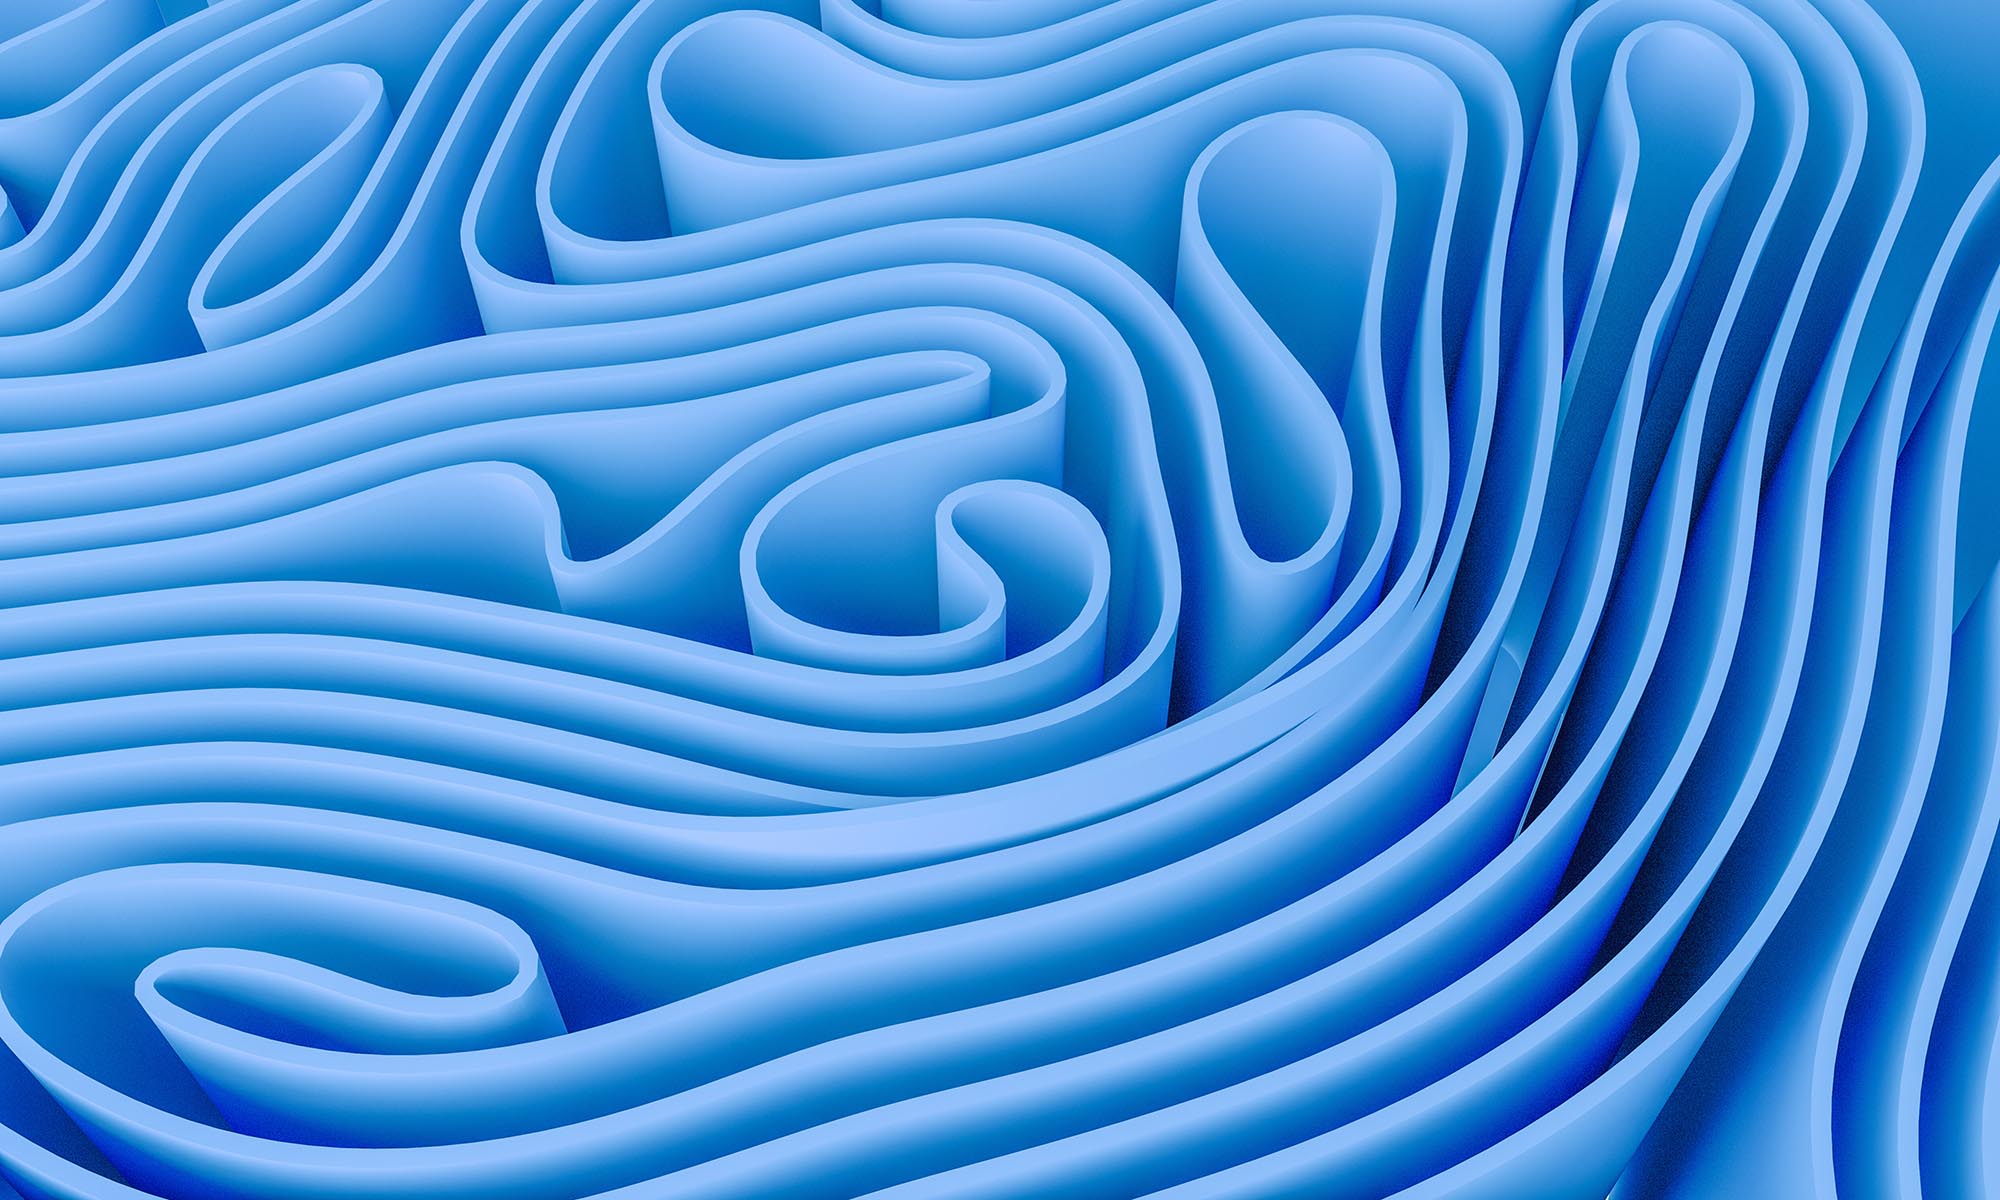 3d blue swirl lines wavy and artistic background